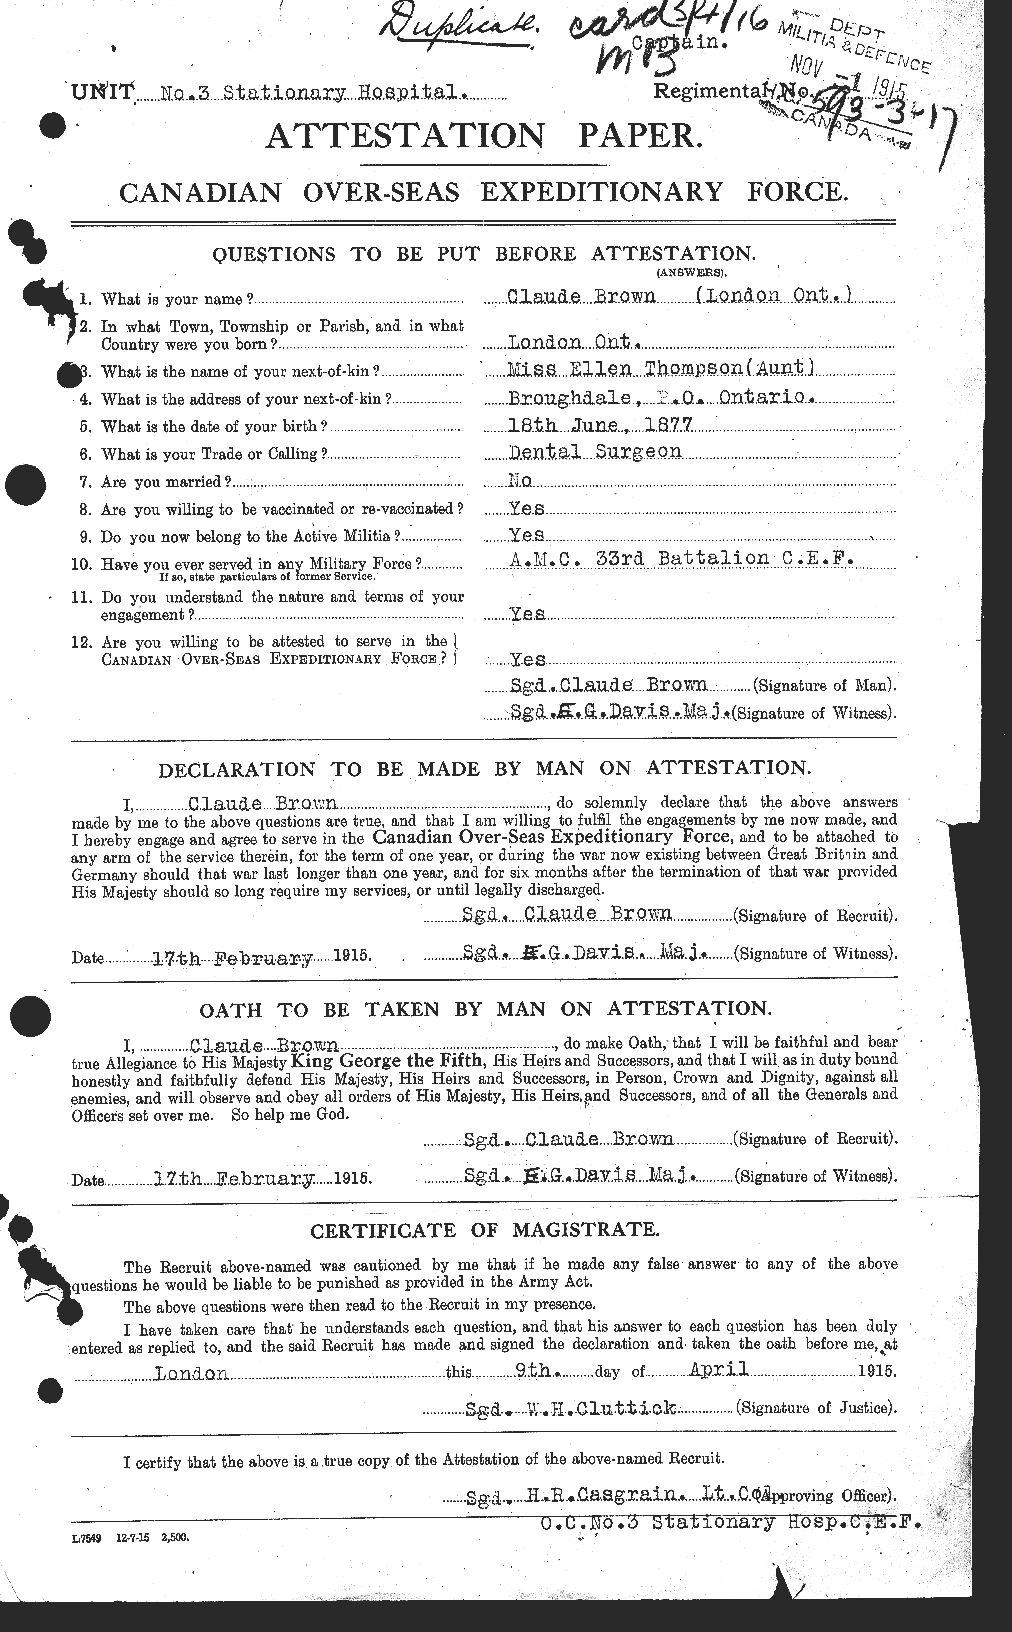 Personnel Records of the First World War - CEF 263147a